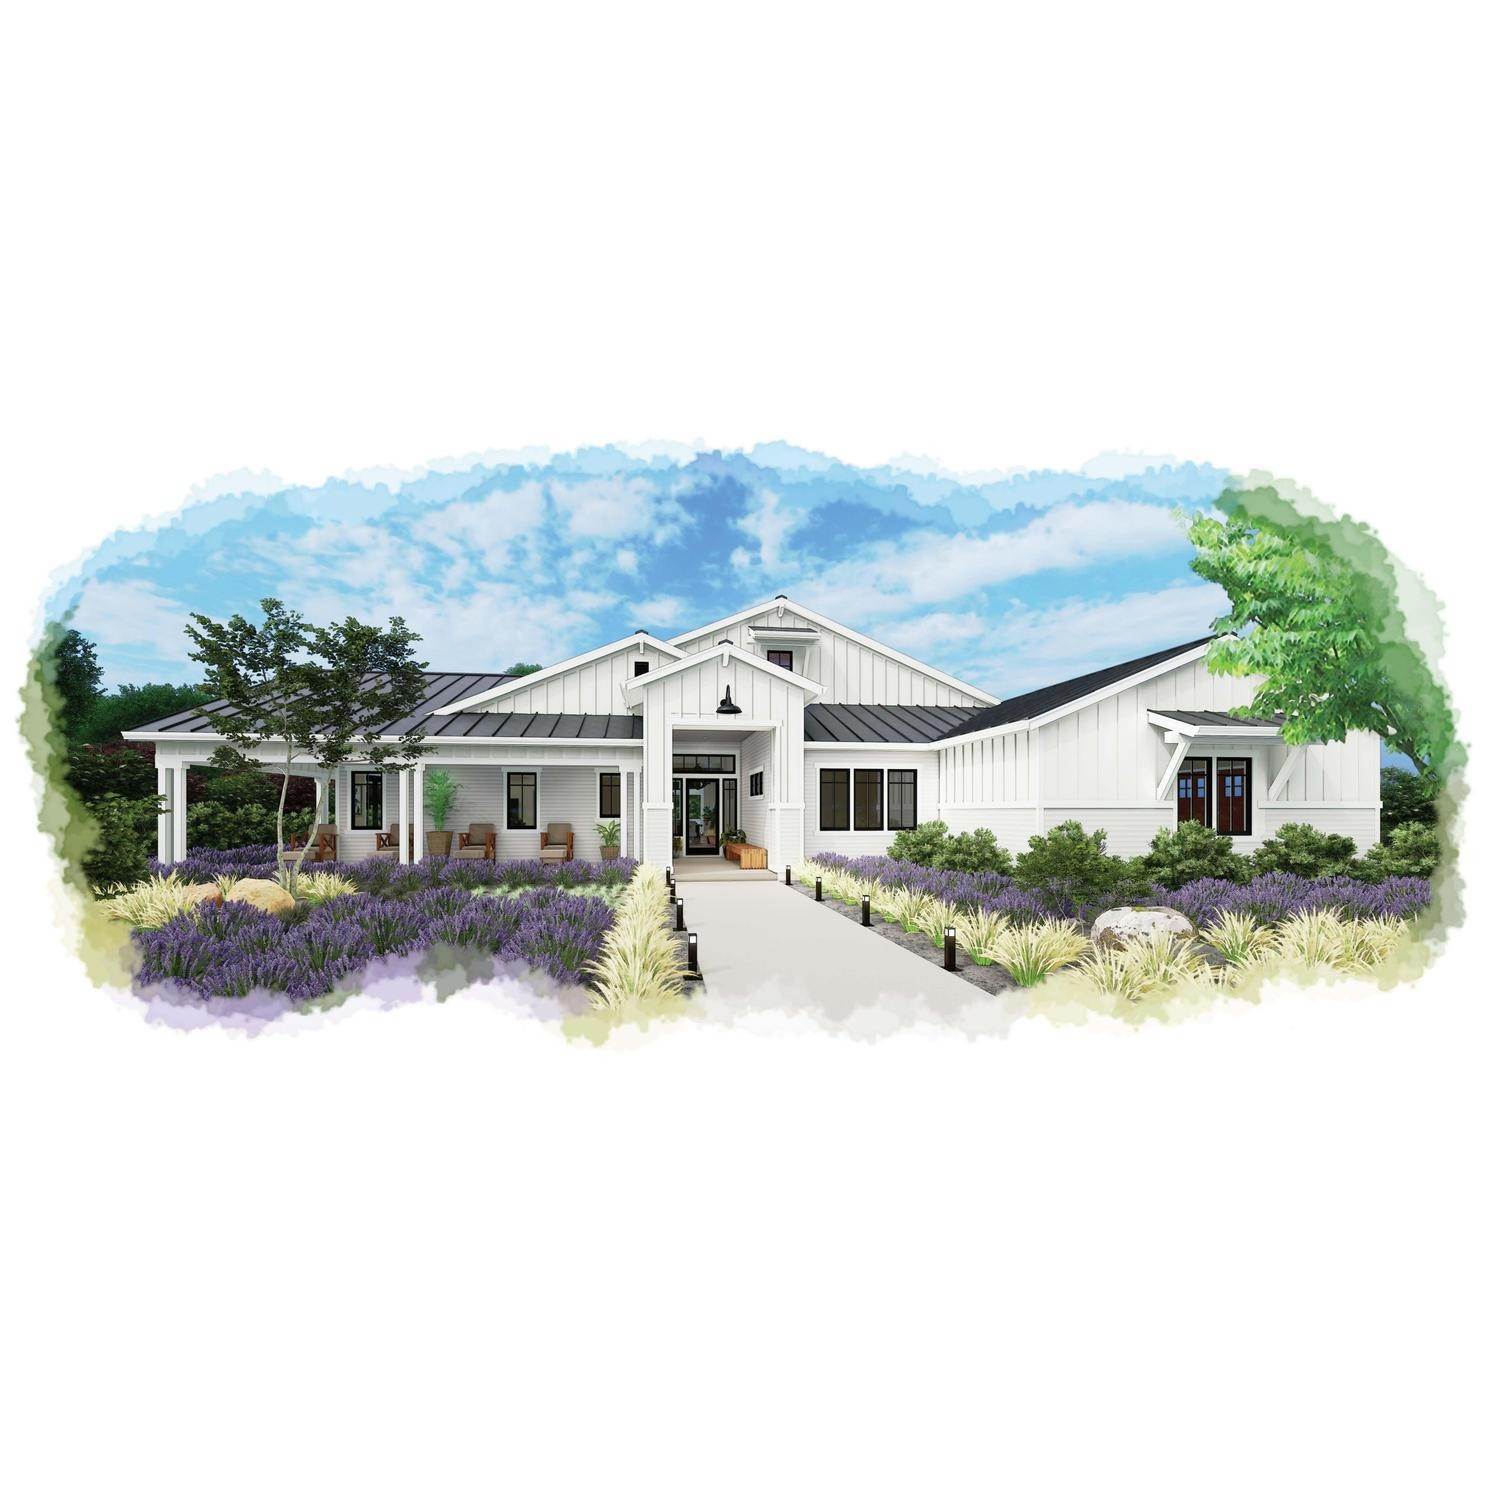 Single Family for Sale at Plan 41 3819 Parker Hill Road SANTA ROSA, CALIFORNIA 95404 UNITED STATES